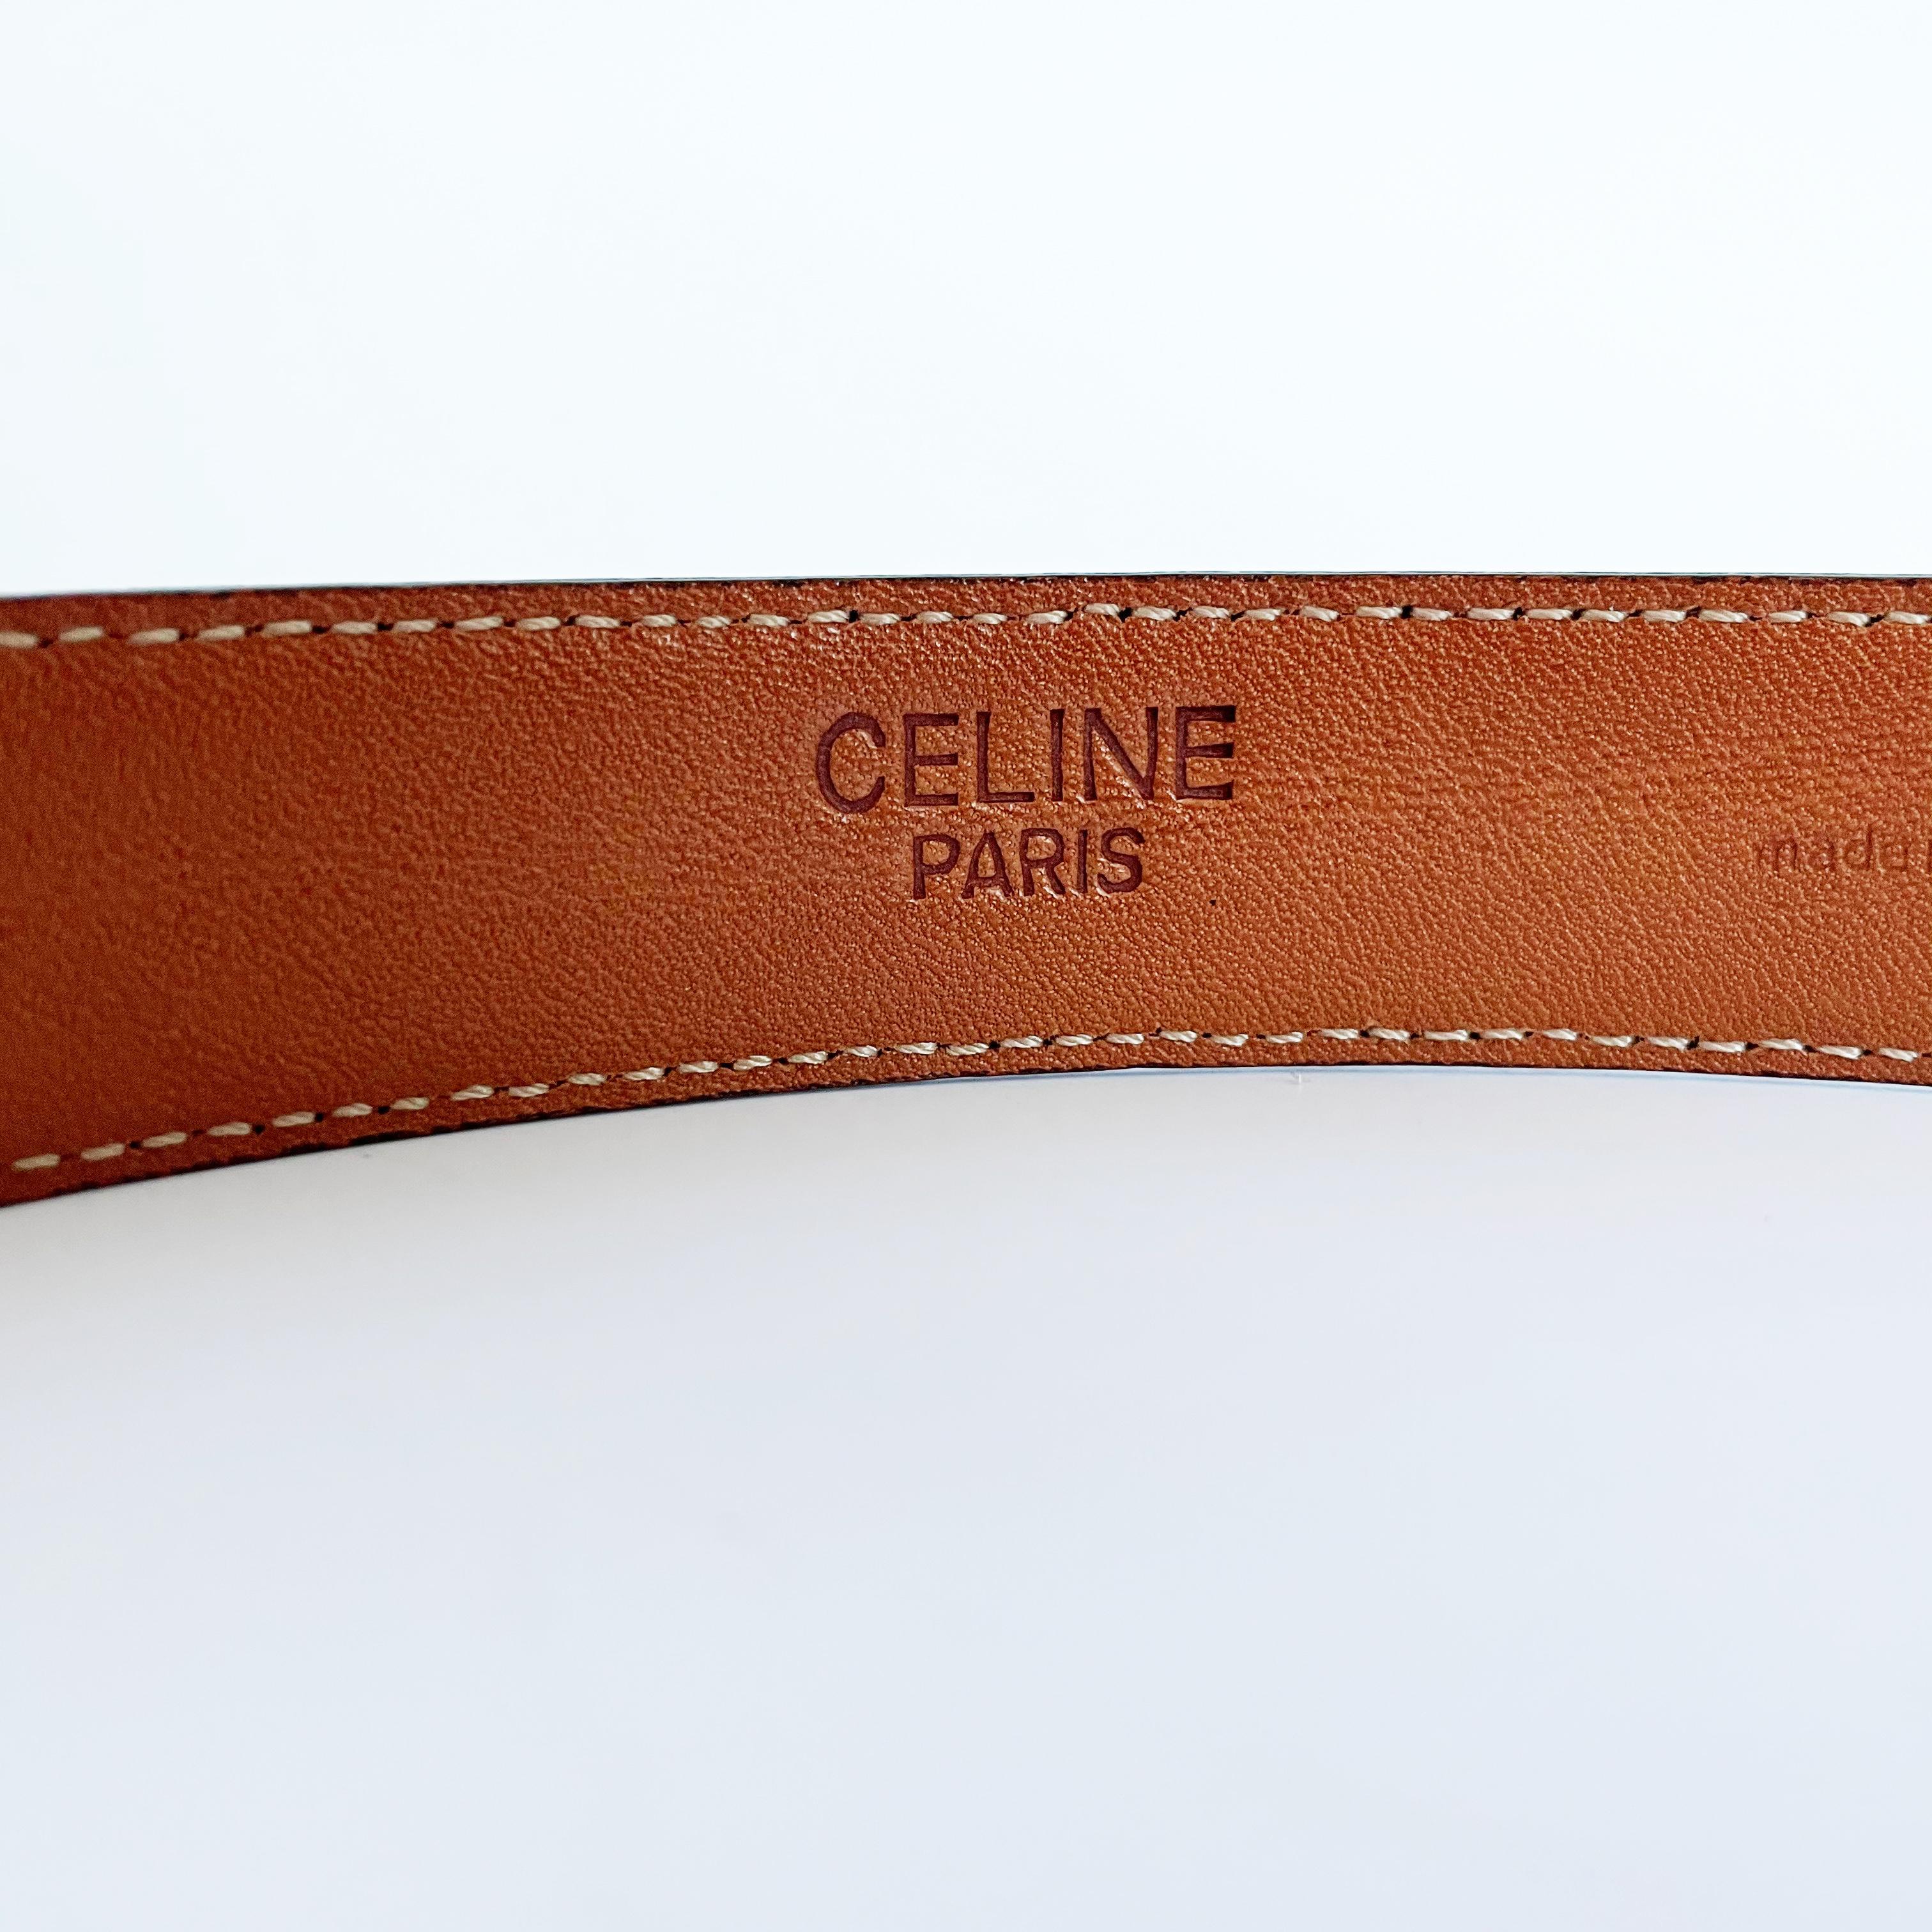 CELINE Paris Belt with Gold Metal Horse Chariot Buckle Leather Size 85 2